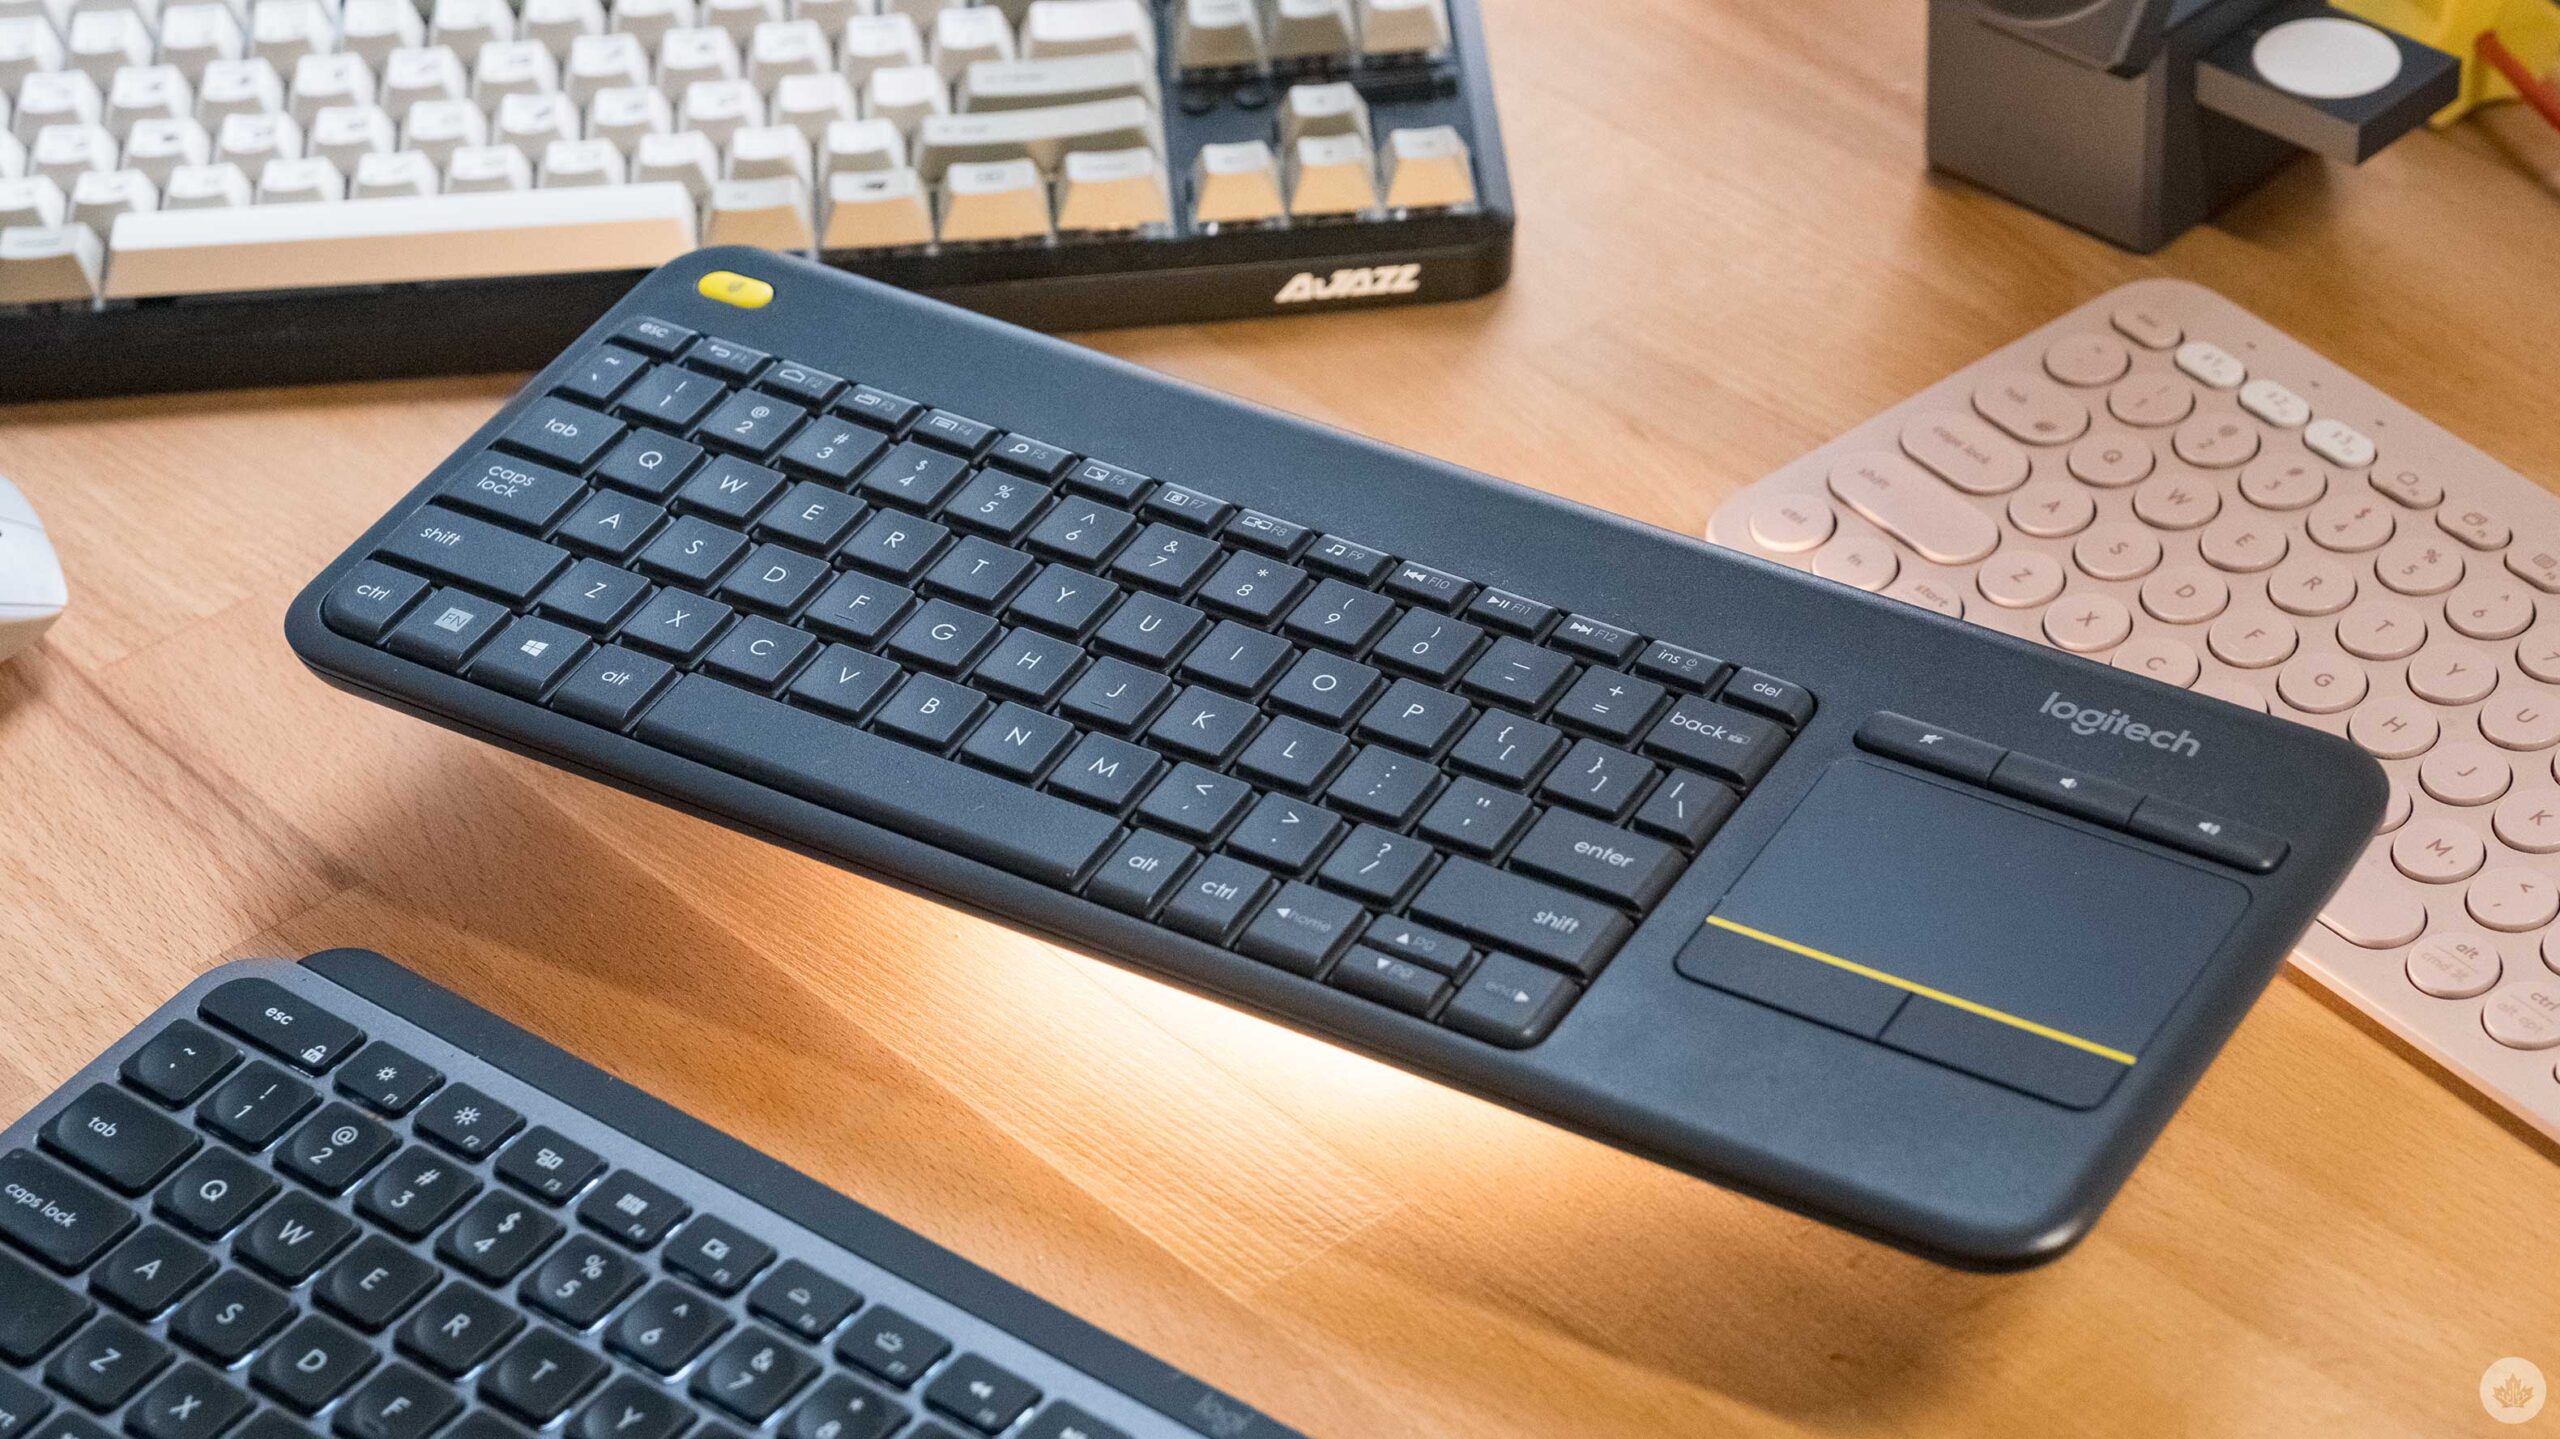 Logitech’s K400 is the perfect living room keyboard